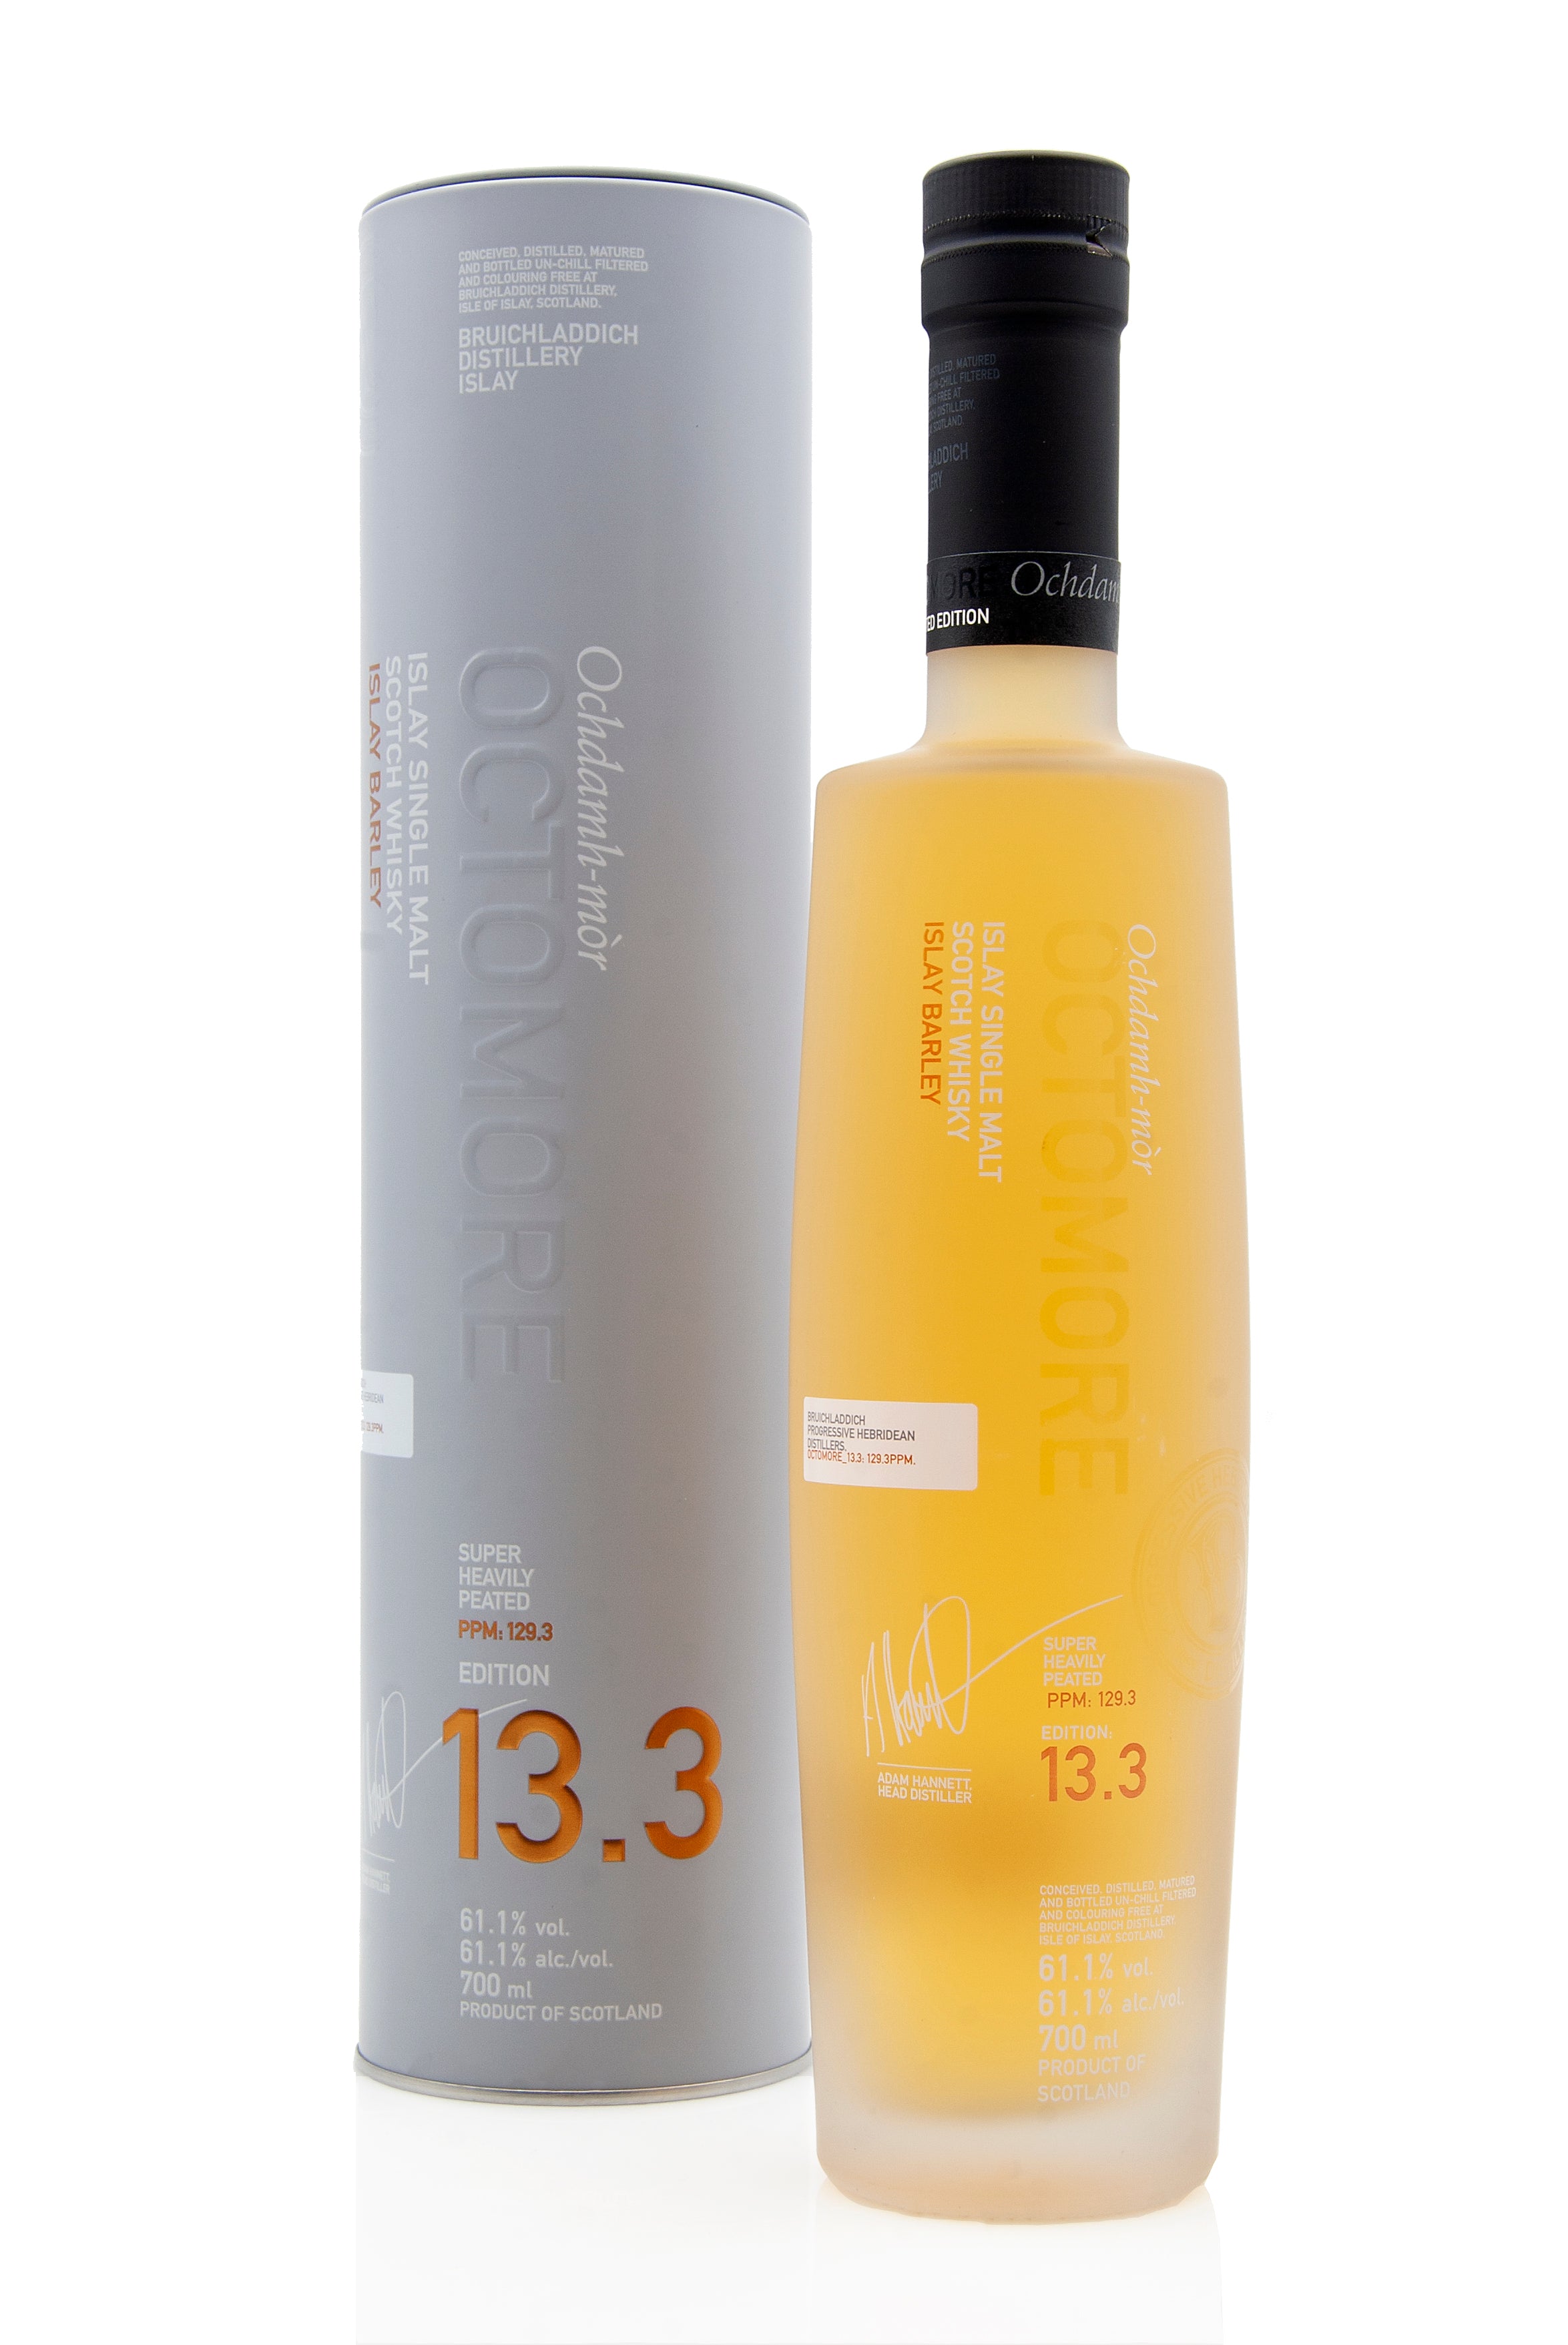 Octomore 13.3 | Bruichladdich Whisky | Abbey Whisky Online